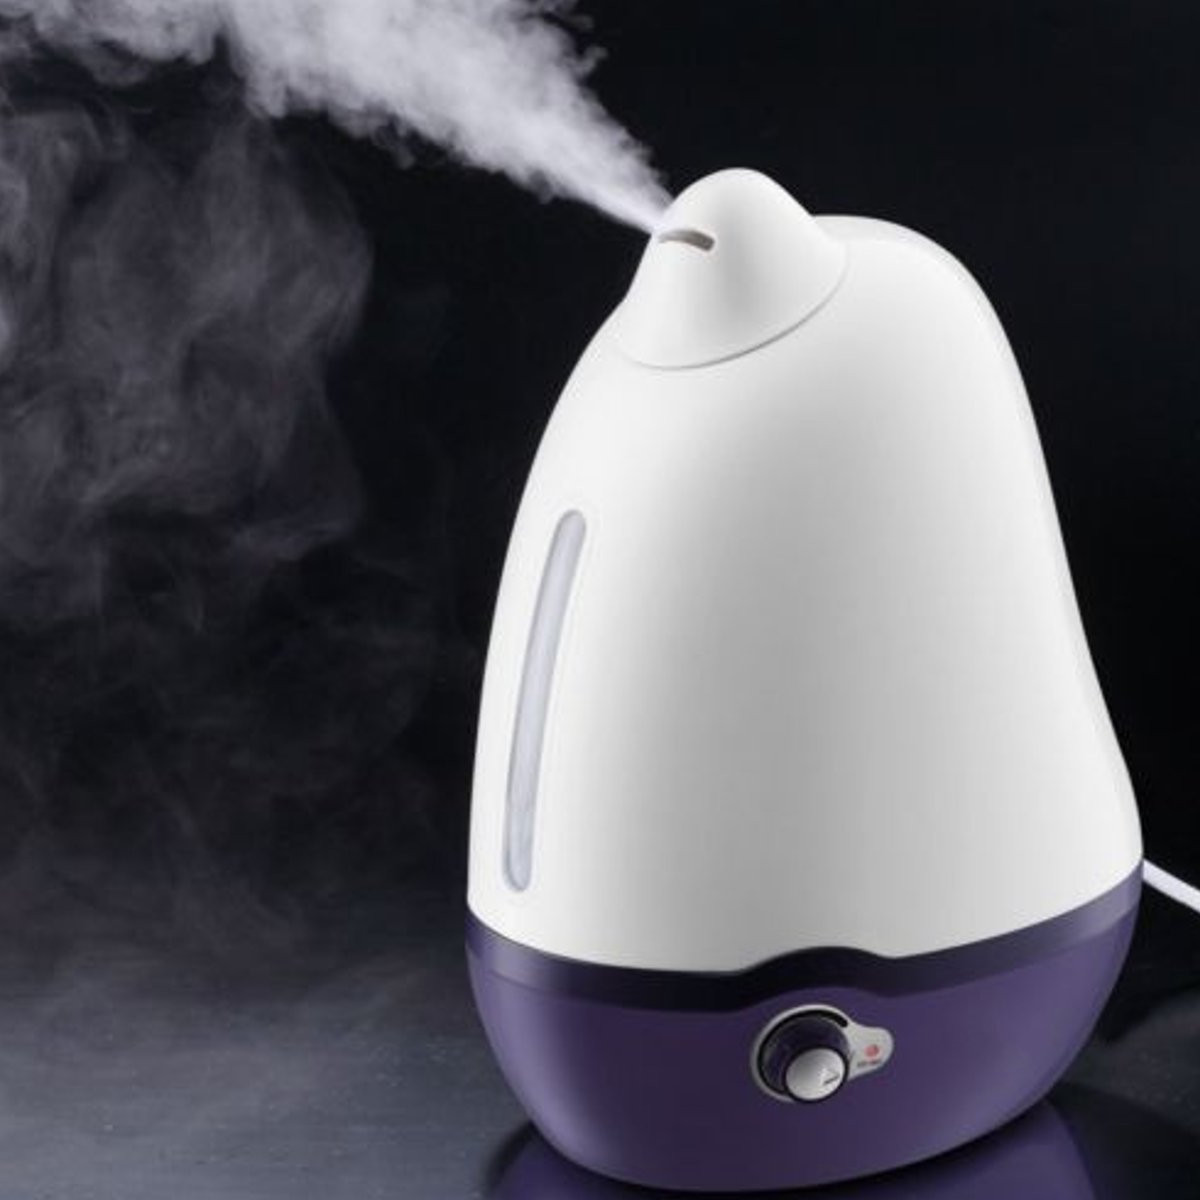 

Ultrasonic Air Humidifier Steam Aroma Diffuser Purifier Mist Maker Home Office Essencial Oil 2L